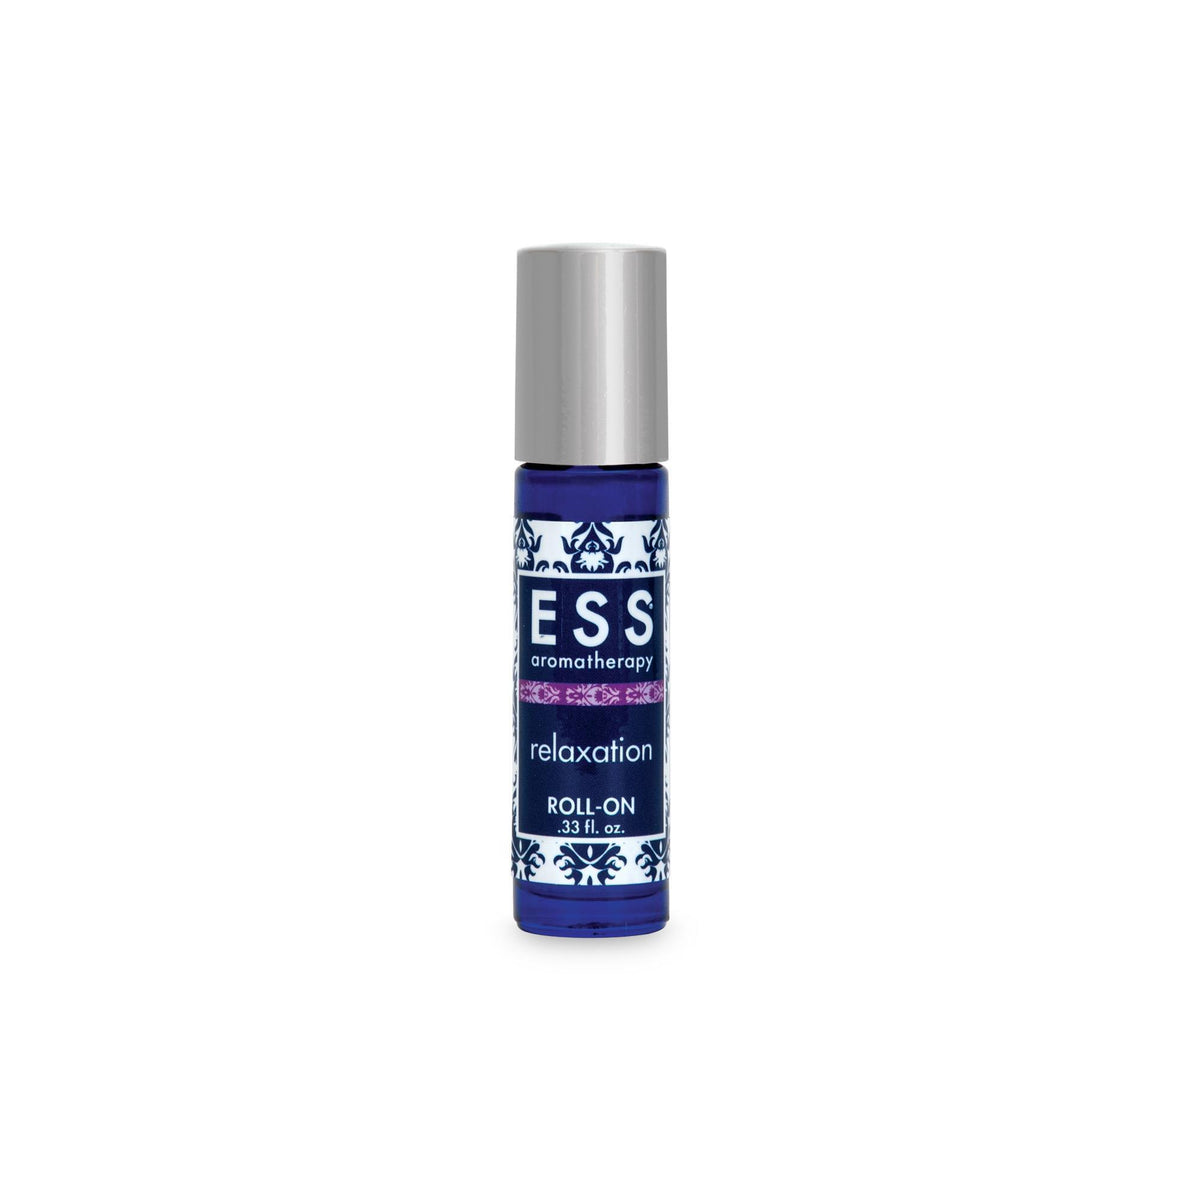 ESS Relaxation Aromatherapy Roll-On / 0.33 Fl. Oz.